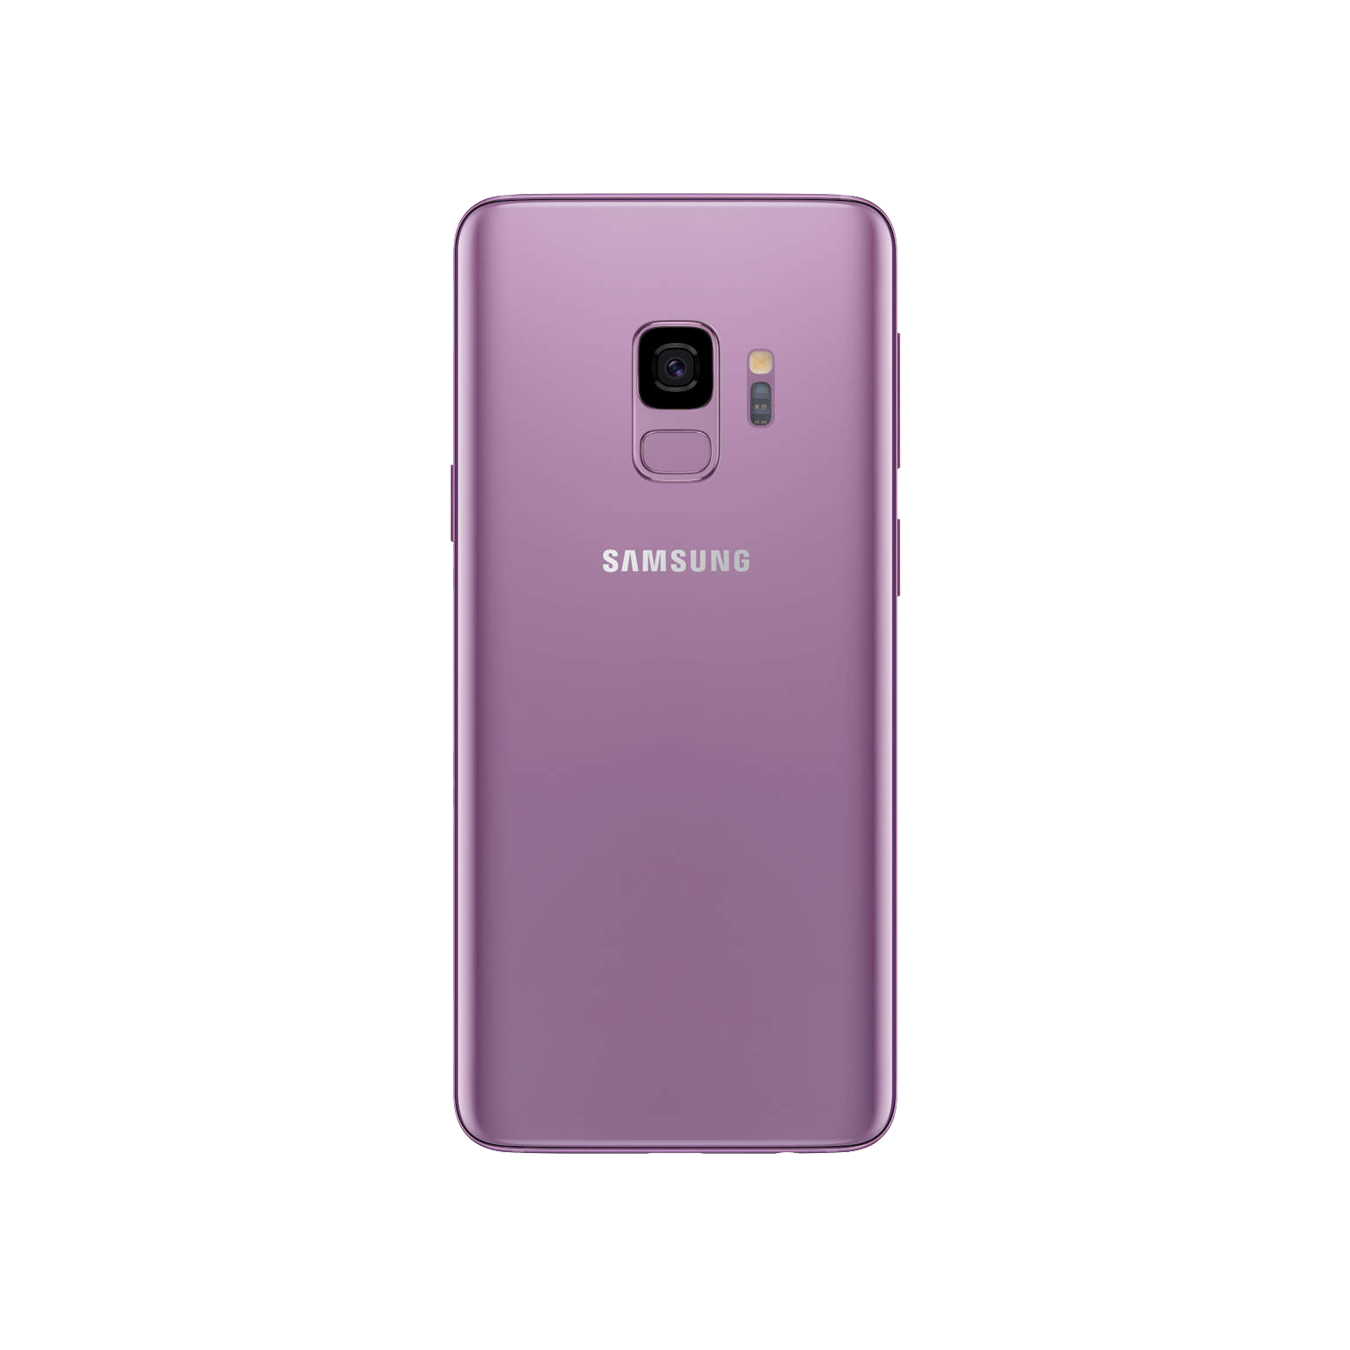 Samsung Galaxy S9 & S9 Plus IMEI repair service to fix bad or blacklisted IMEI, ensuring full functionality and connectivity, available at cleanimei.com